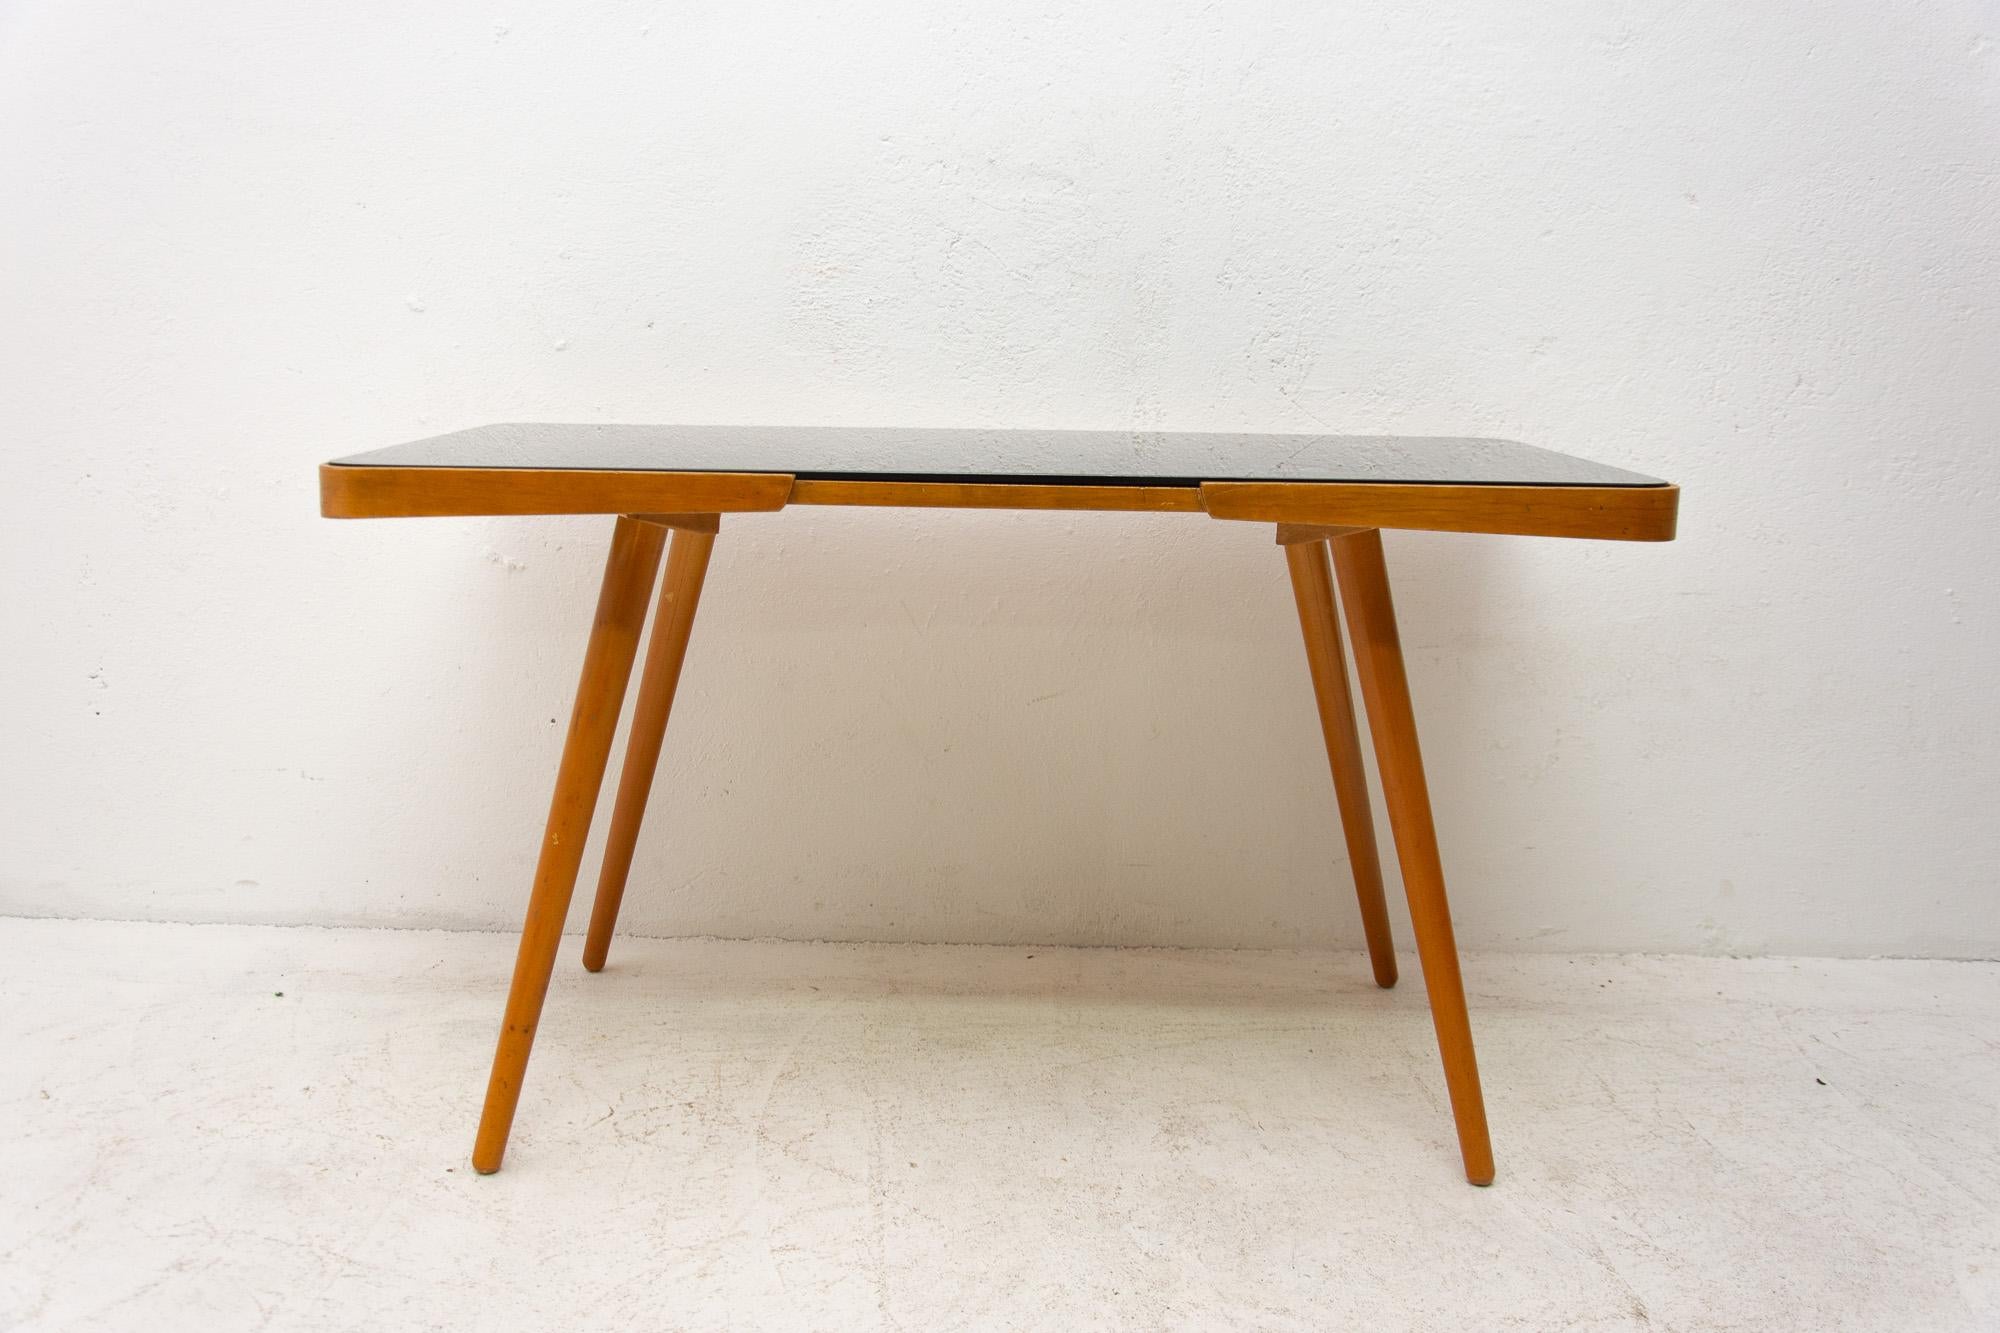 Midcentury opaxite glass coffee table from the 1960s. Associated with the world-renowned exhibition EXPO 58 in Brussels. It was produced by “Interior Praha”. It features a beechwood structure and a black glass tabletop. In very good vintage